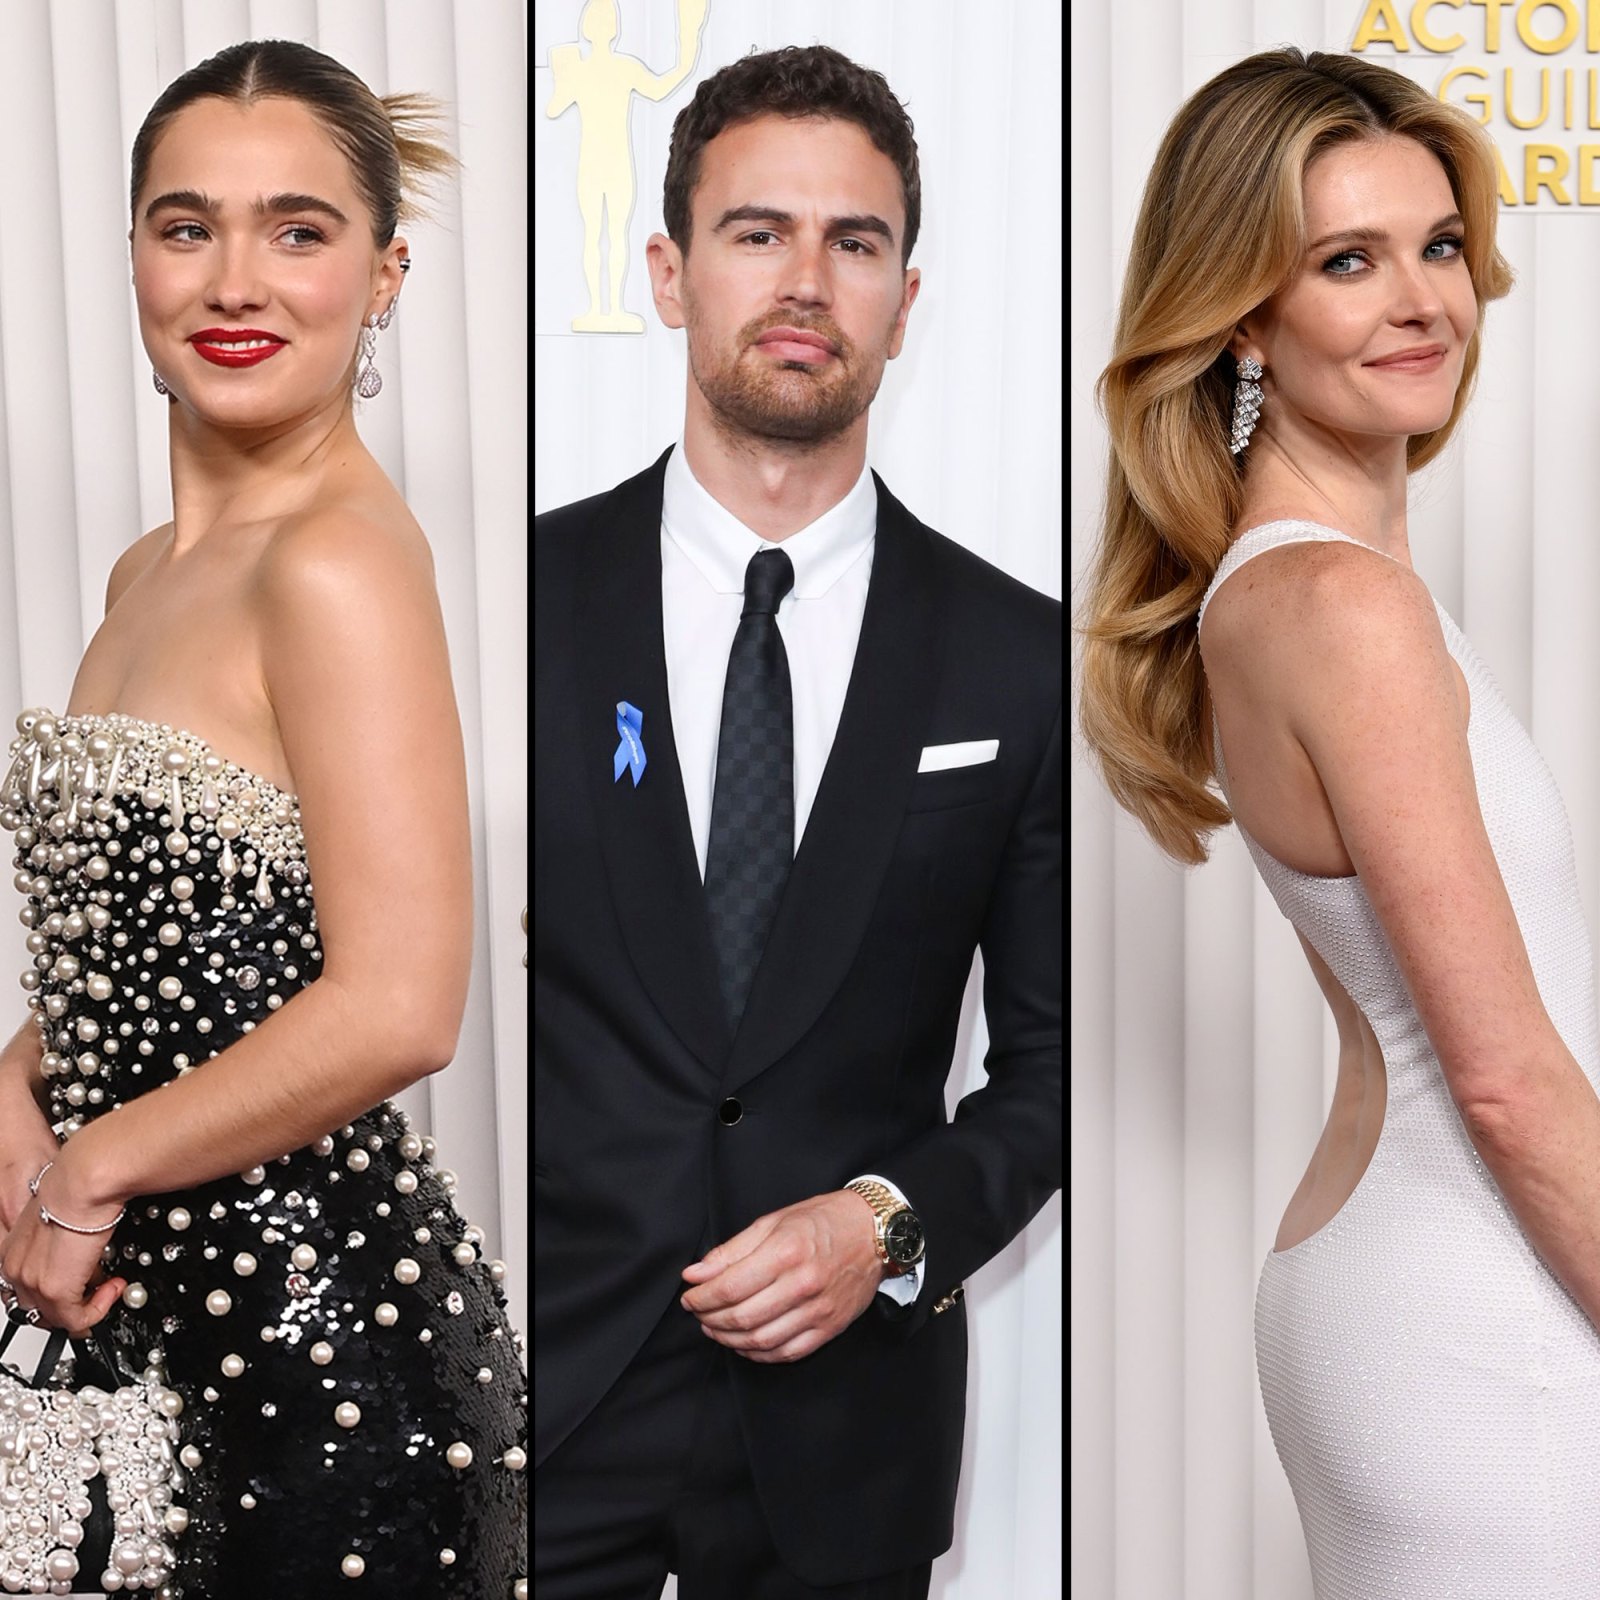 The 'White Lotus' Cast Brings Their A-Game to the 2023 SAG Awards Red Carpet: Haley Lu Richardson, Theo James and More blue pin